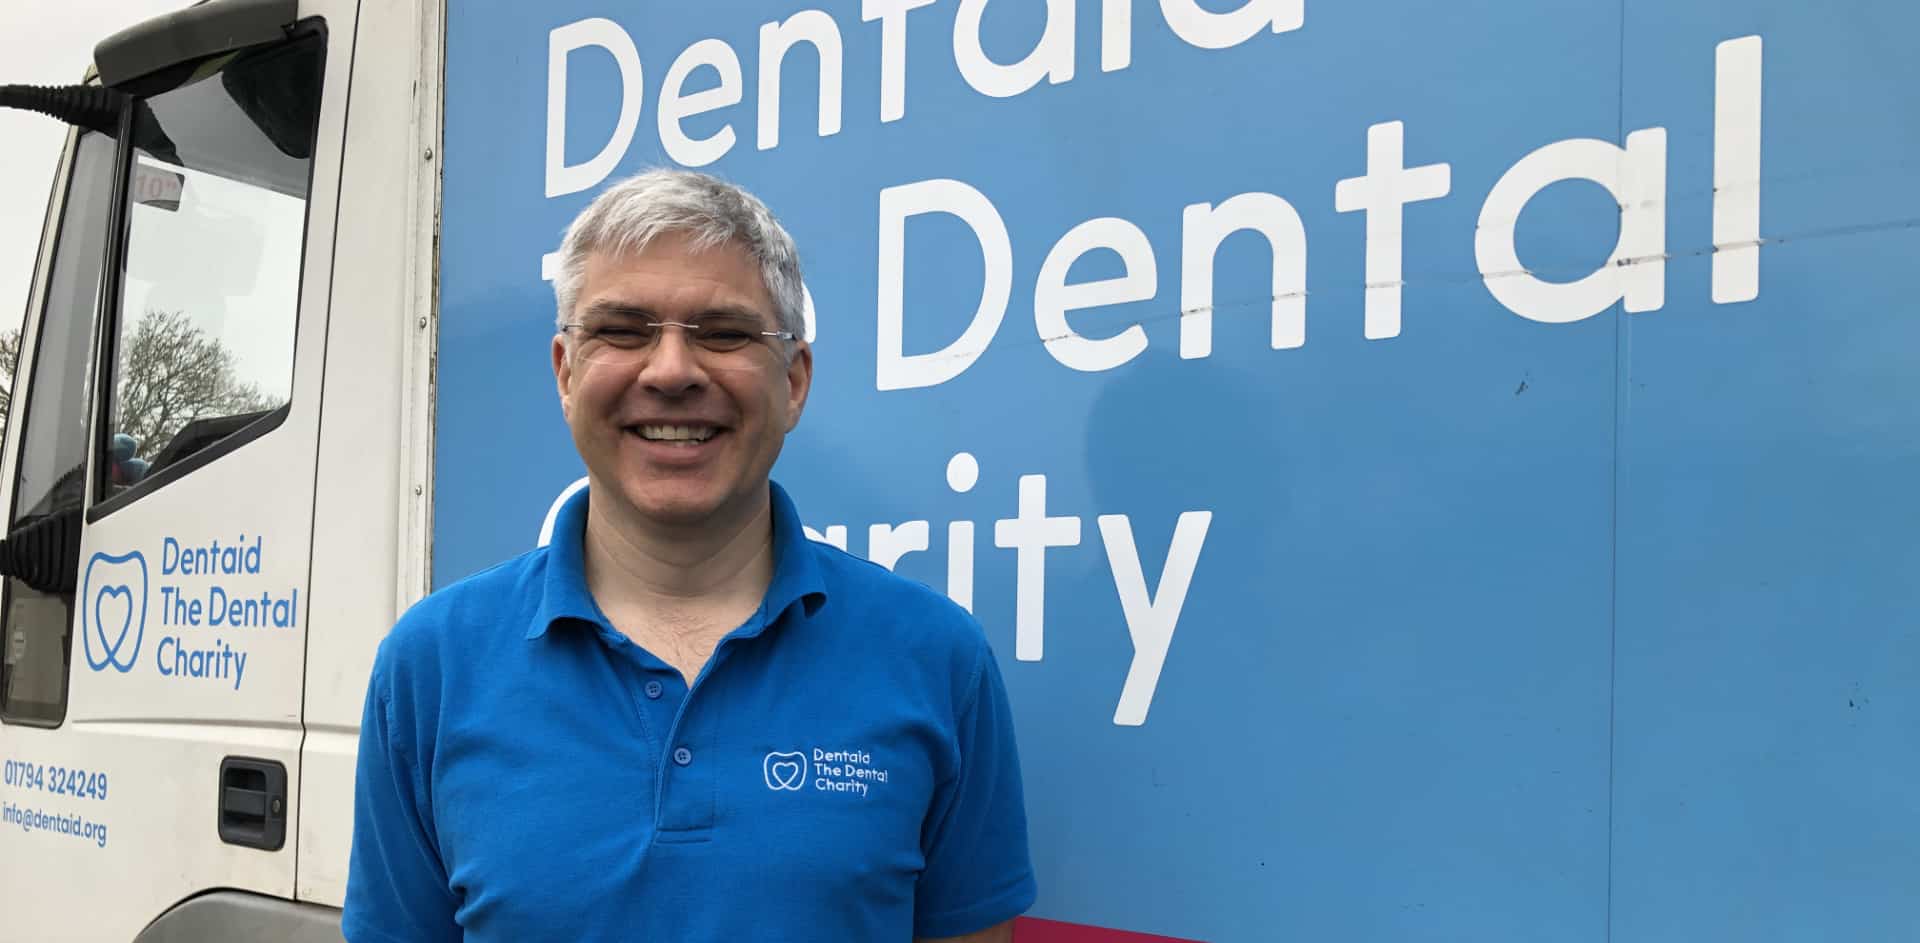 Andy Evans - Dentaid CEO